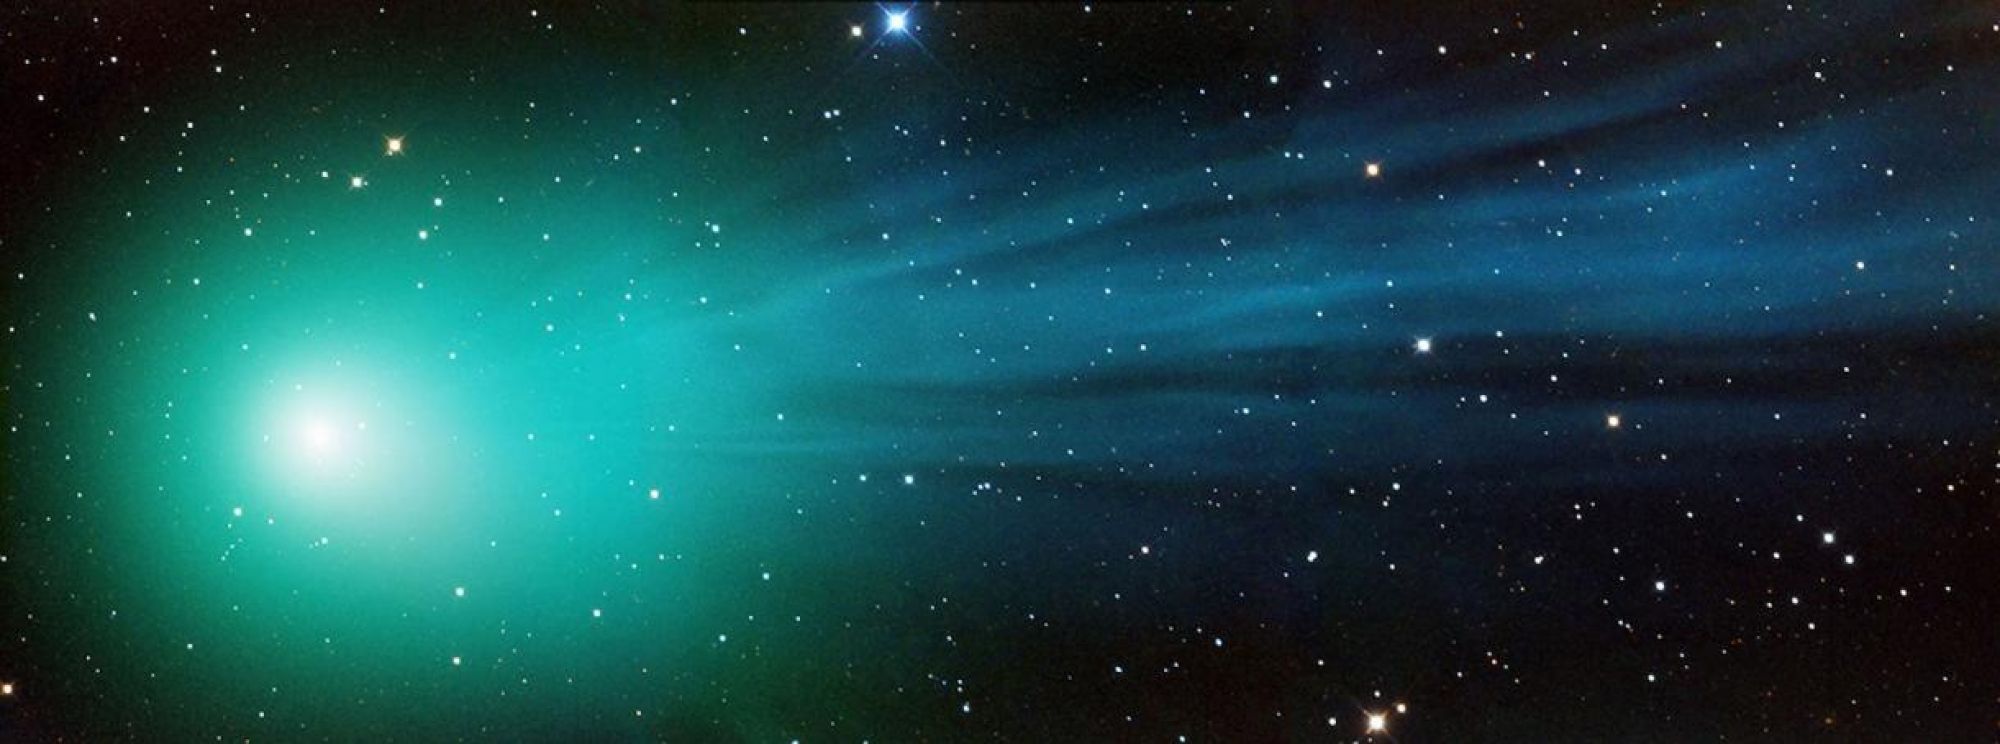 Image of Comet Lovejoy, also known as C/2014 Q2, passing through the solar system more than 50 million miles away from our own planet.